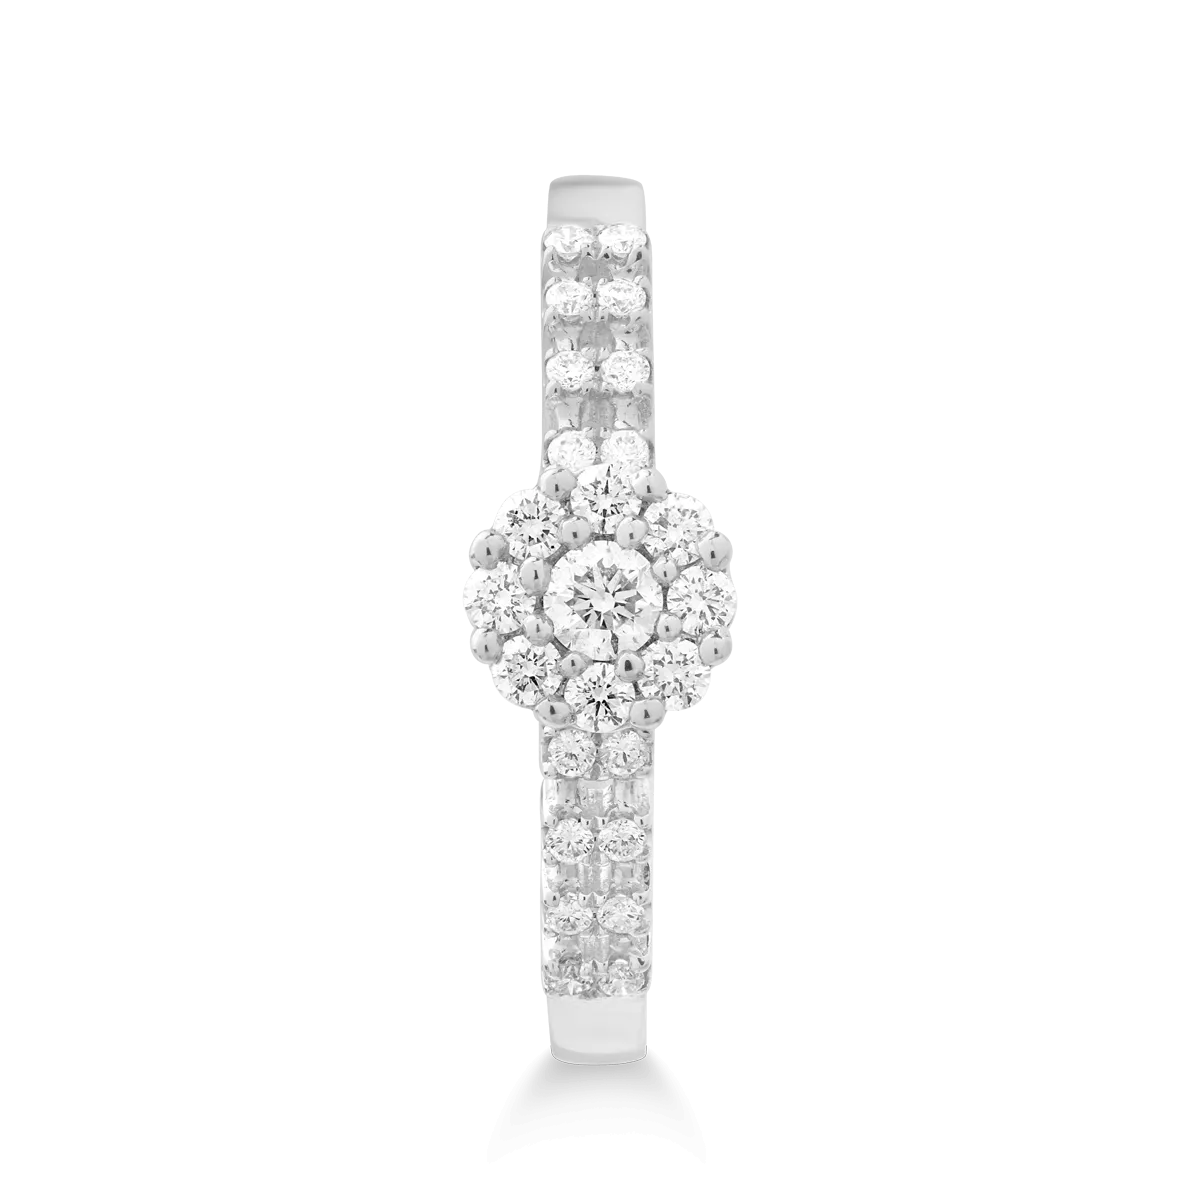 18K white gold ring with 0.27ct diamonds